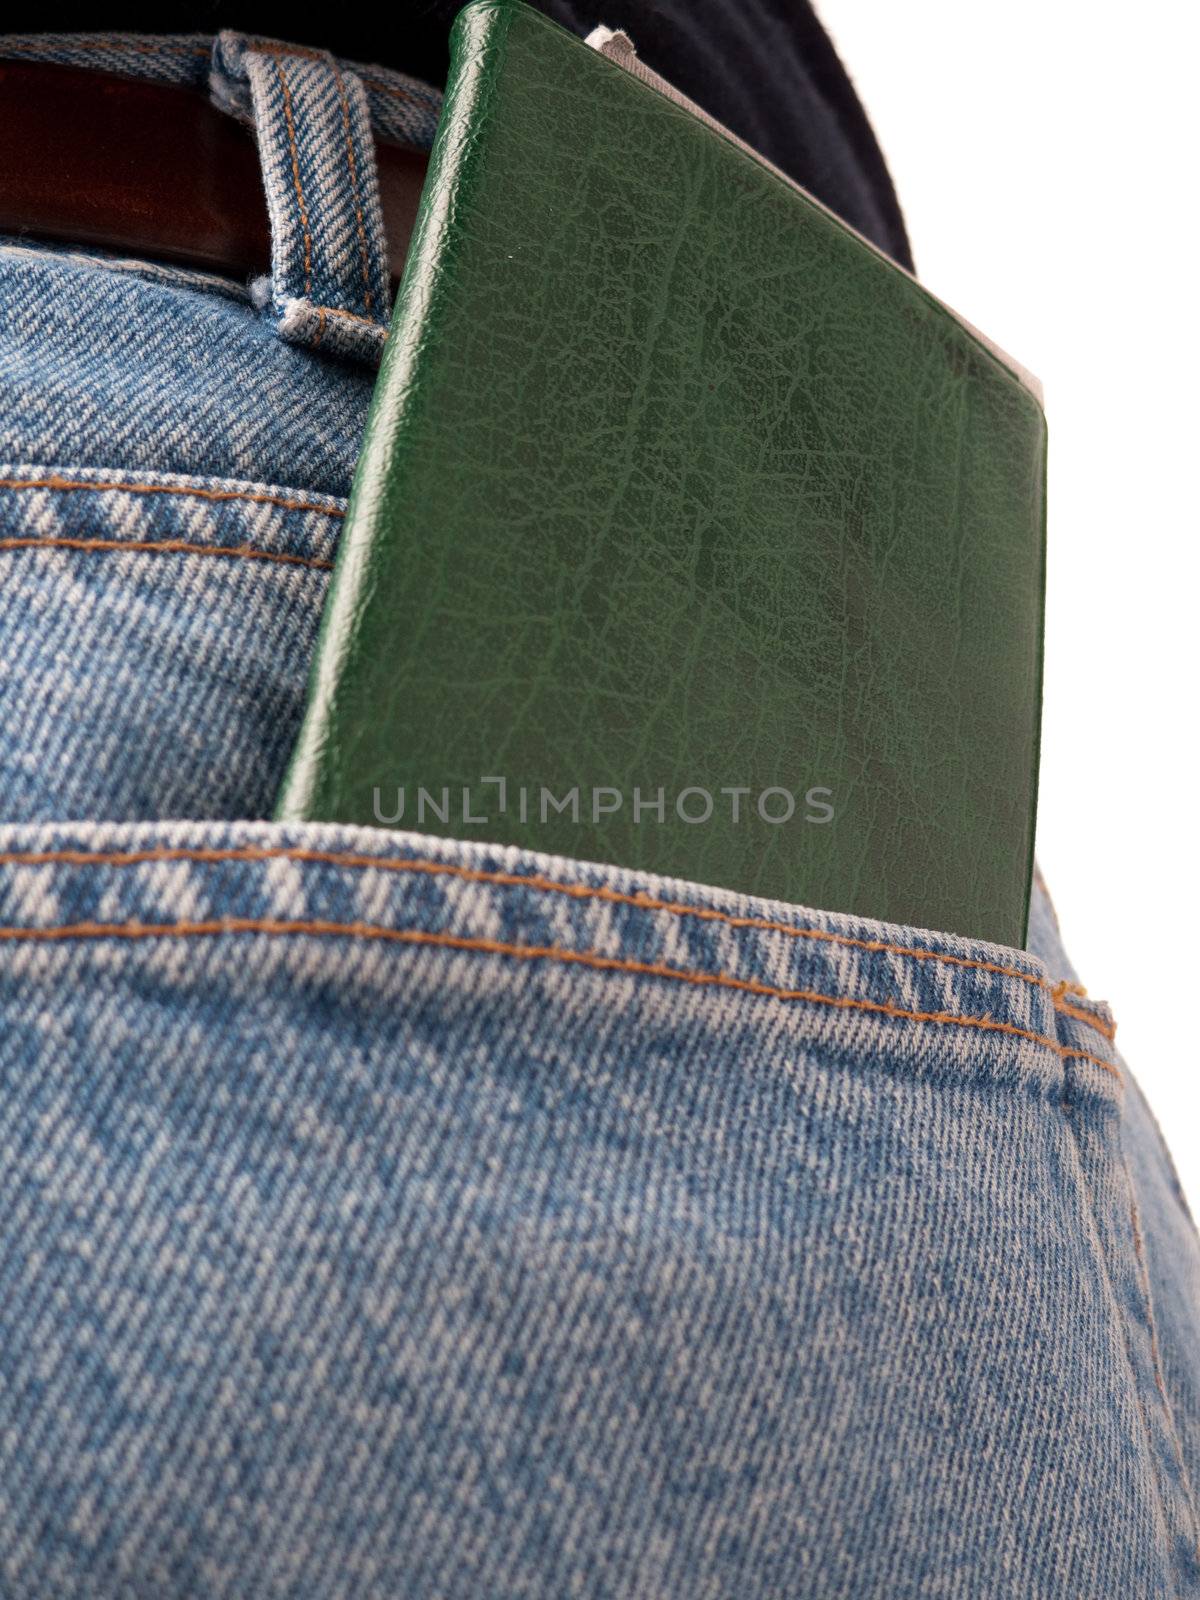 Jeans back pocket with cheque book by woodygraphs